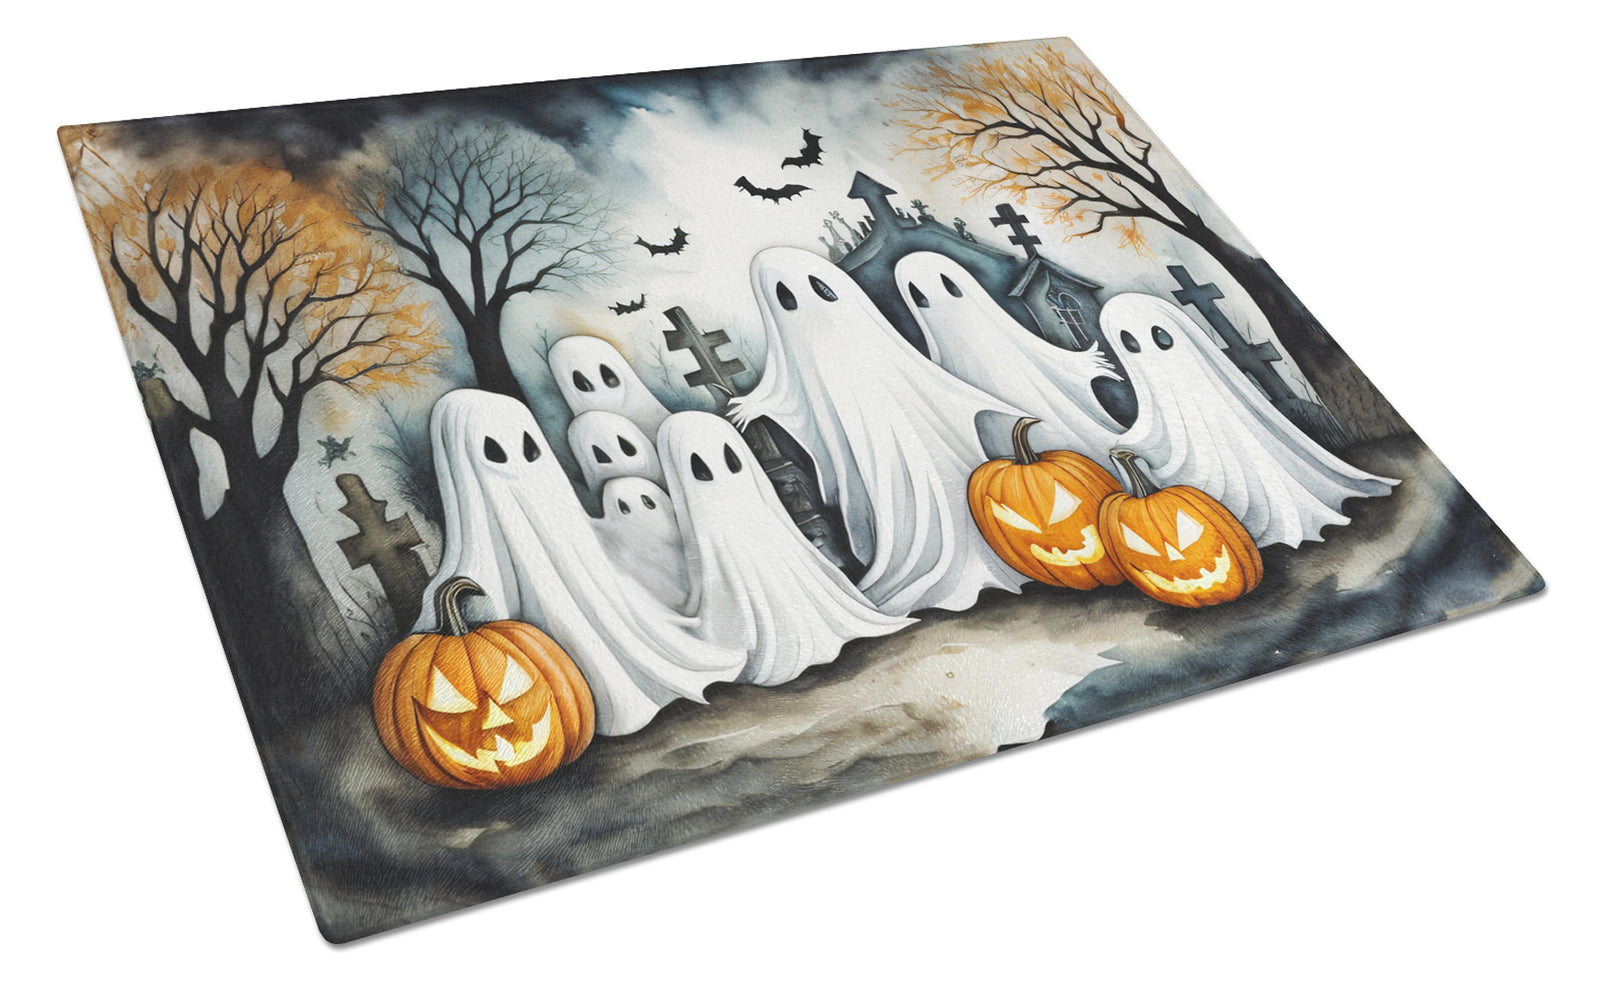 Buy this Ghosts Spooky Halloween Glass Cutting Board Large